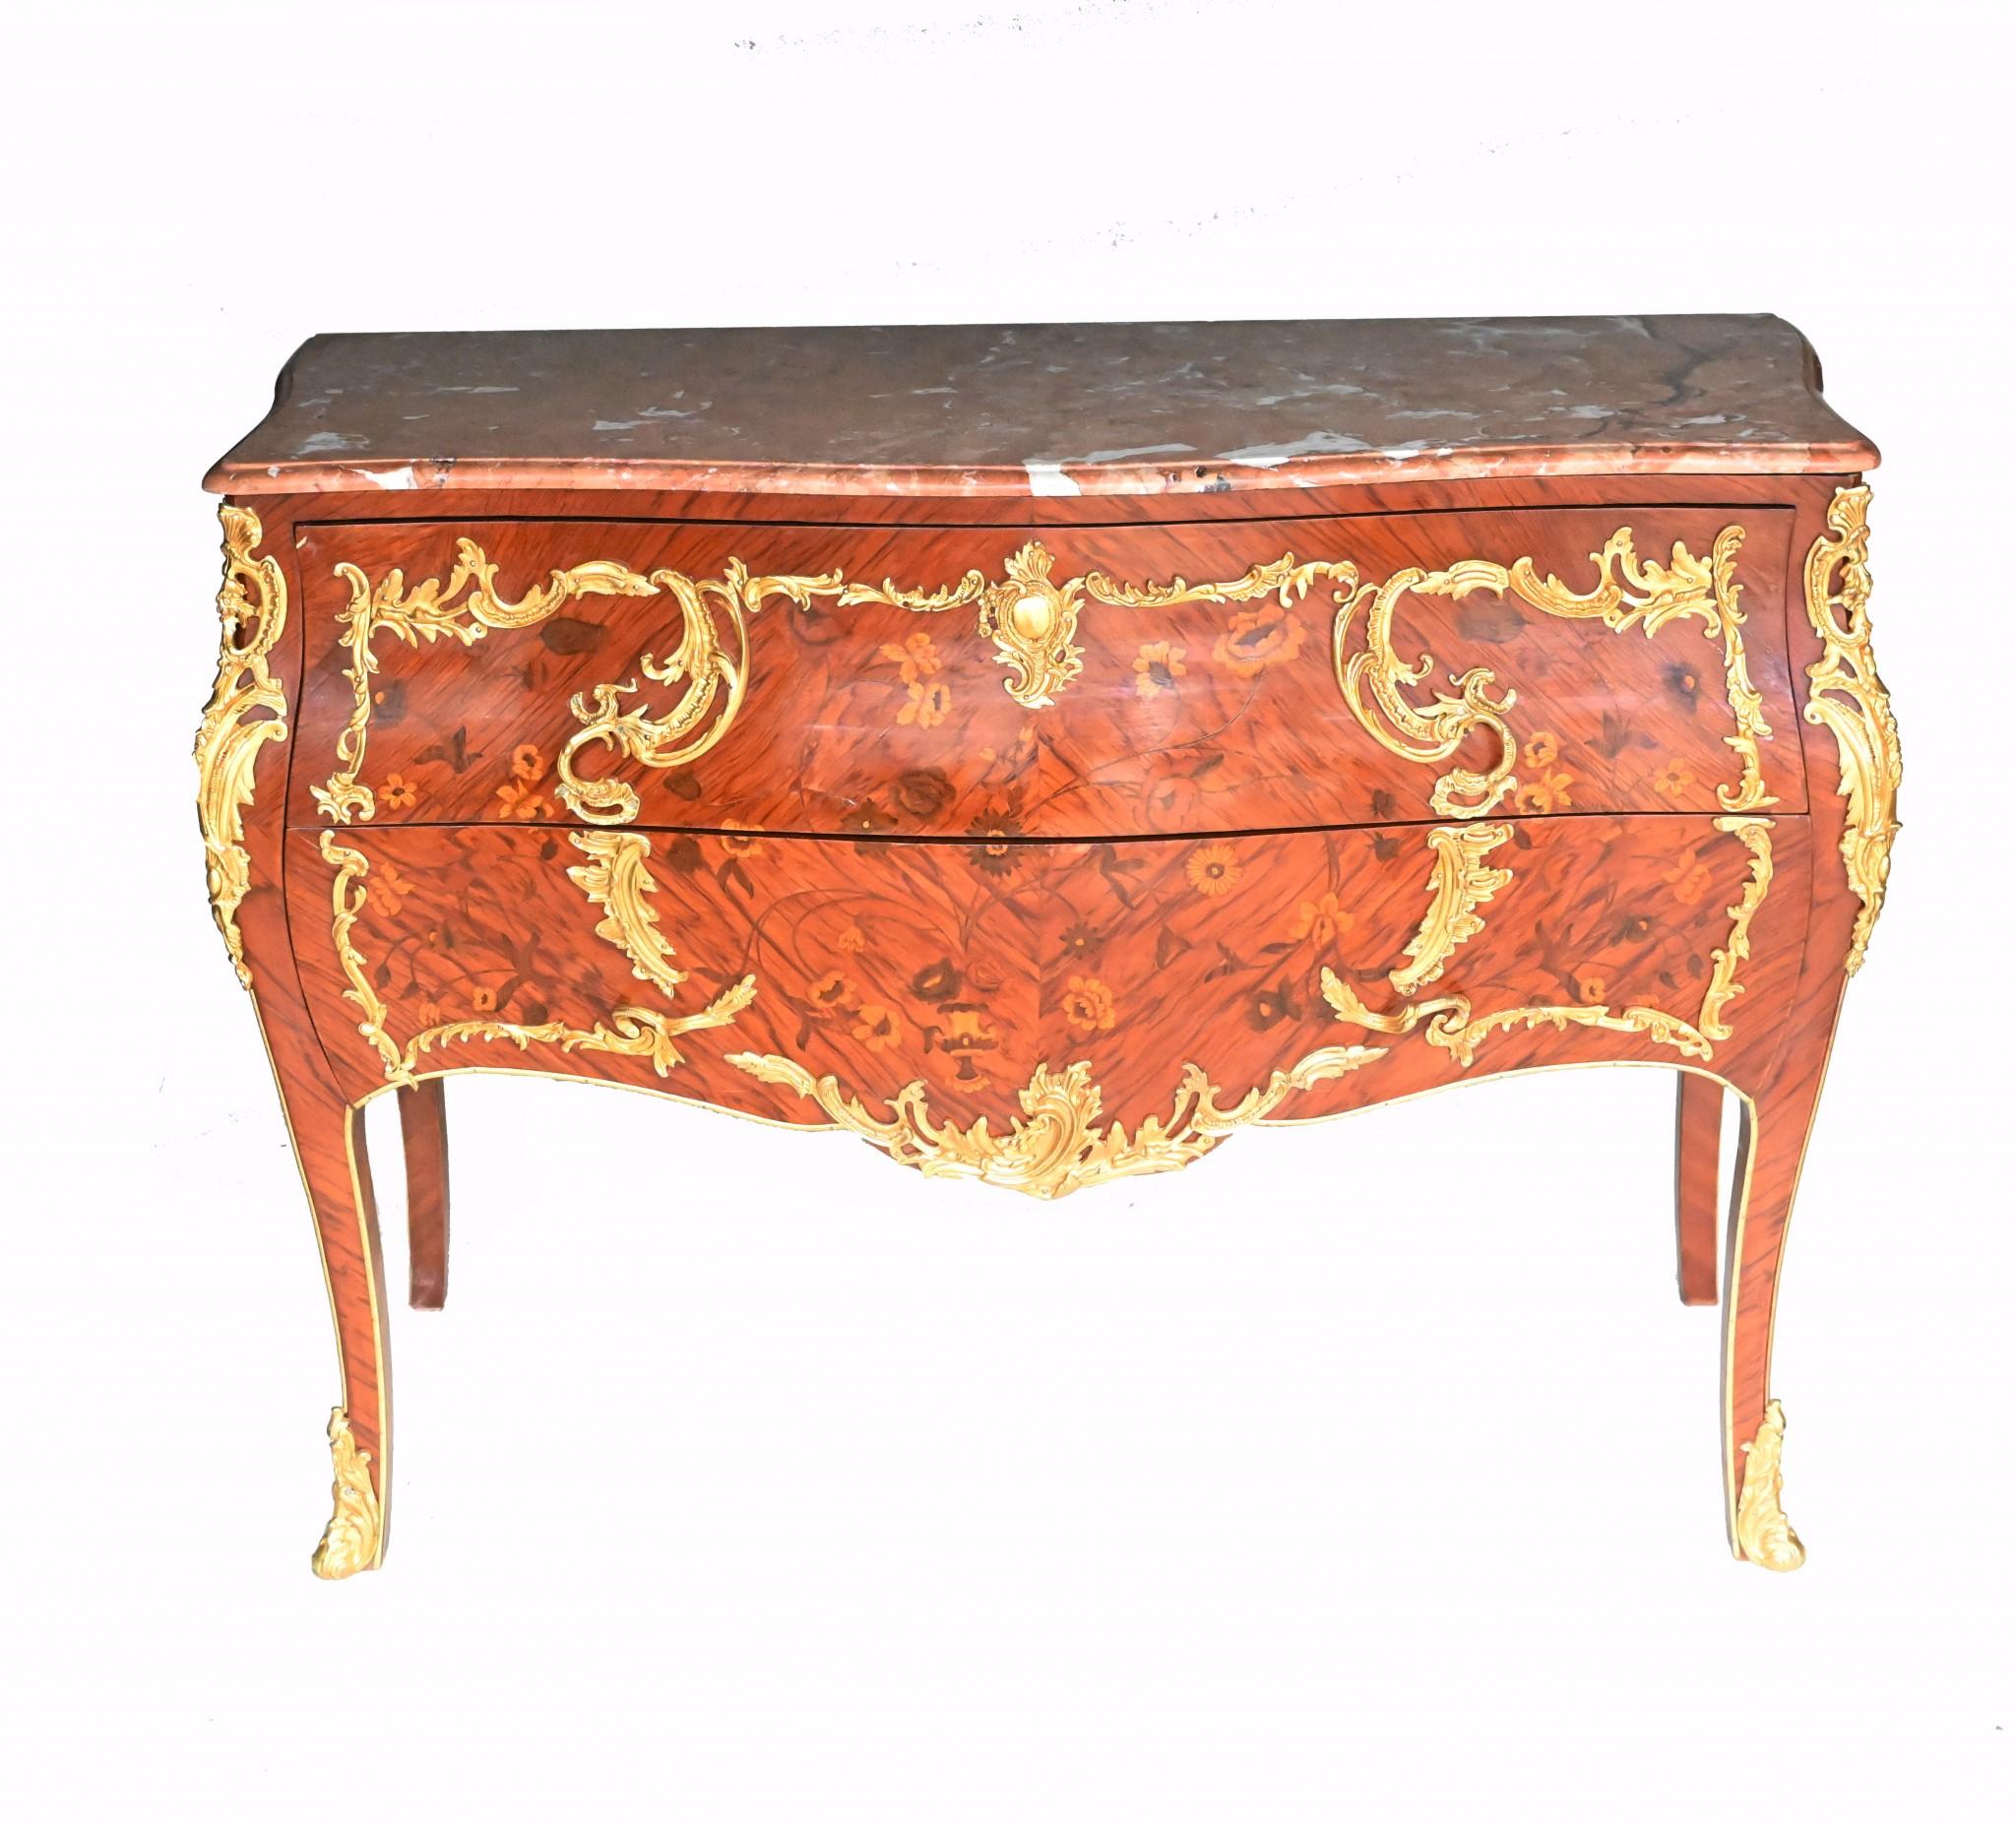 Absolutely stunning pair of French commodes after Francois Linke
Such a great design with the bombe form and intricate inlay work
Features a shaped red marble top which is smooth and chip free
I love the rococo form to the original gilt fixtures